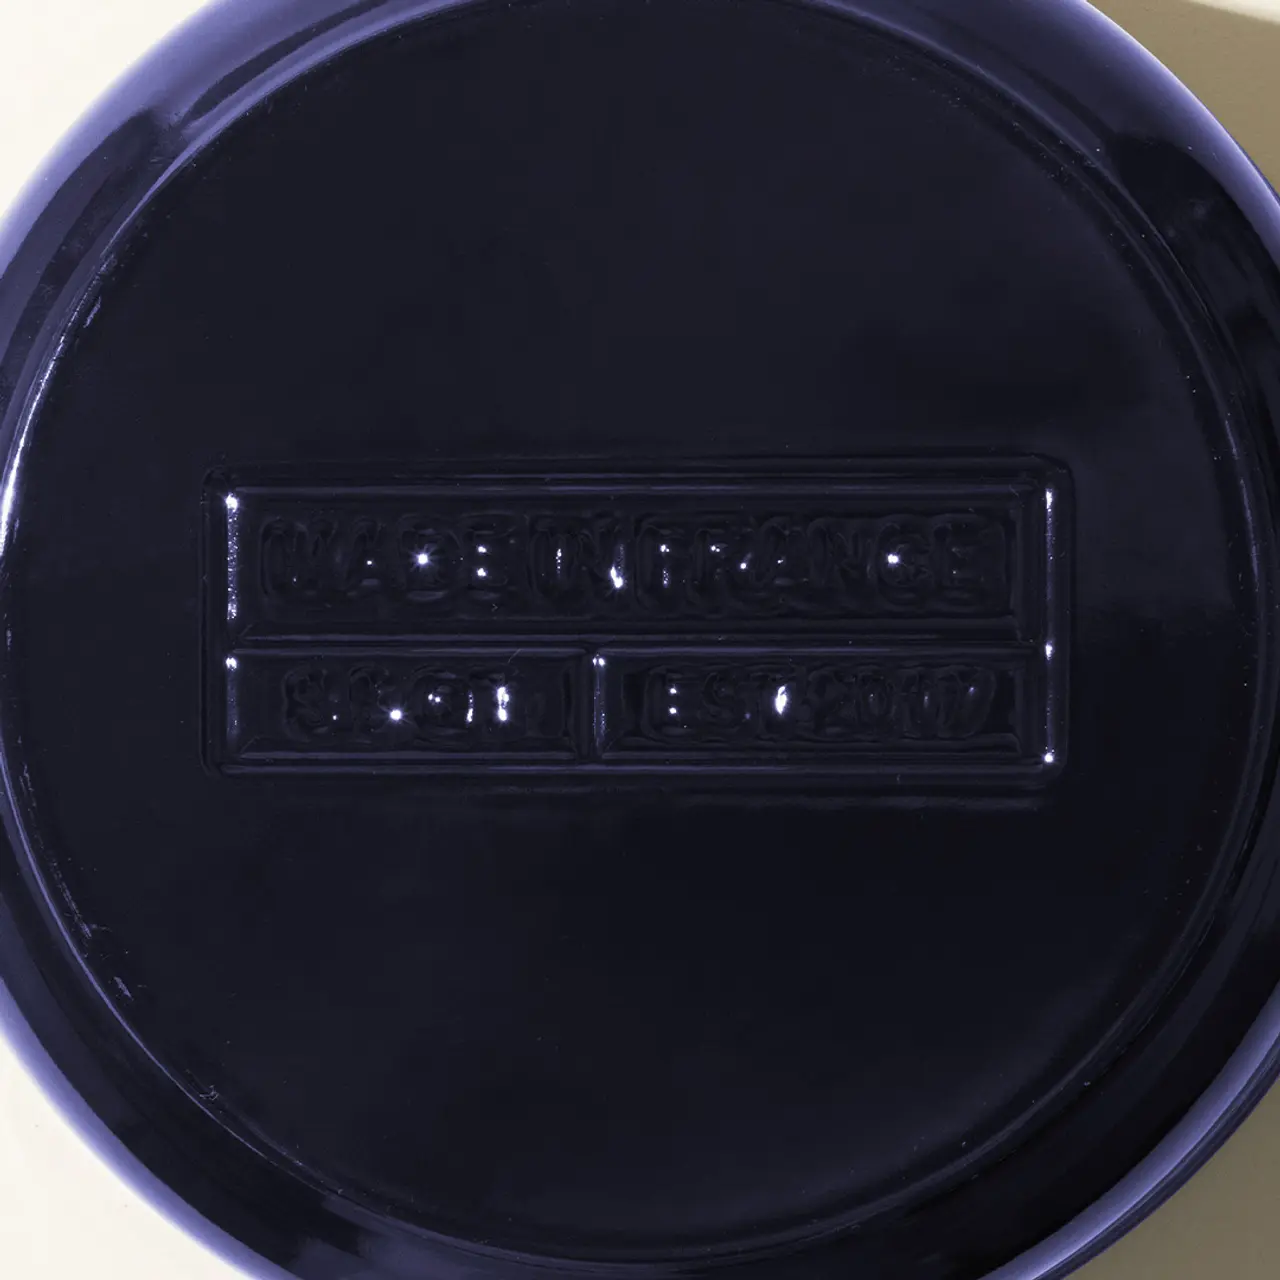 A close-up of a glossy black plate with embossed lettering that reads "MADE IN FRANCE" and "LE 2001."